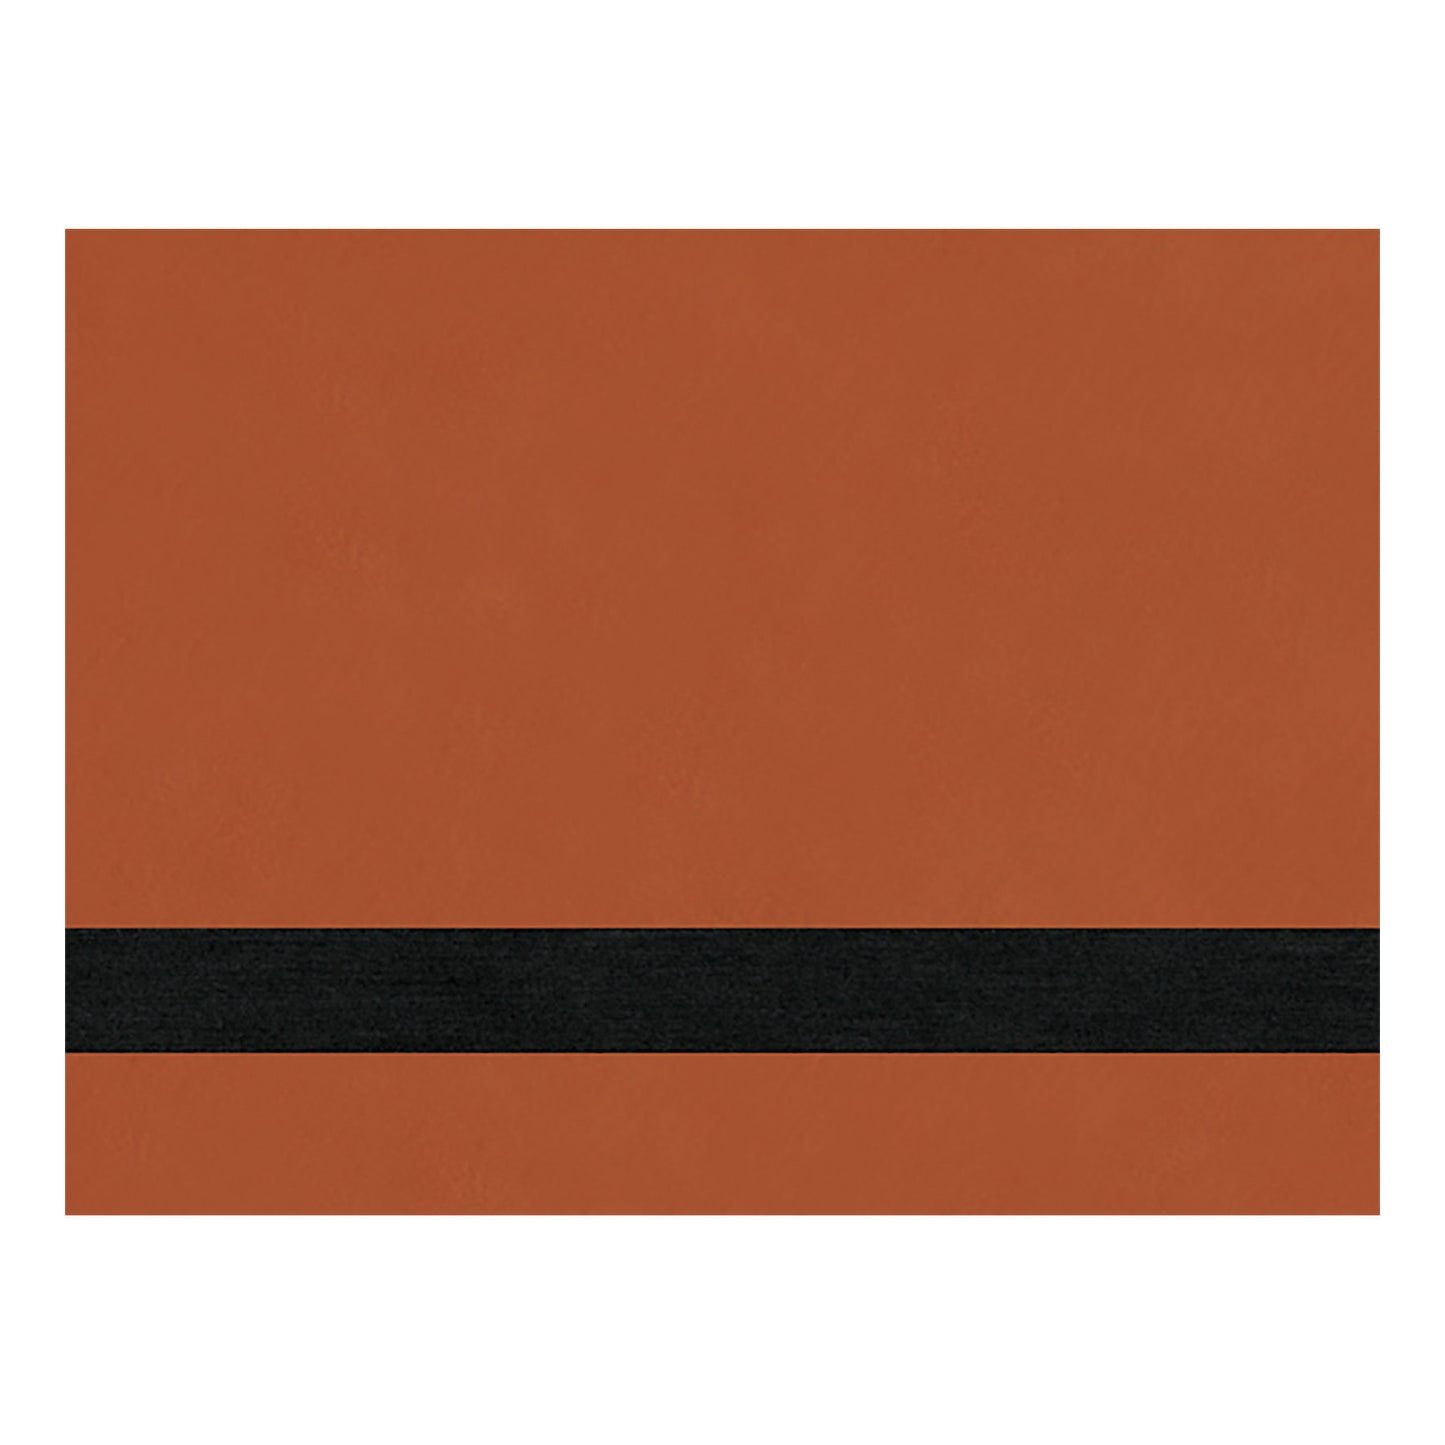 Leather Sheets with Adhesive for Laser Engraving, Laserable Leatherette 12" x 18", Laser Engraving Supplies, for Glowforge FSL Supplies and Materials